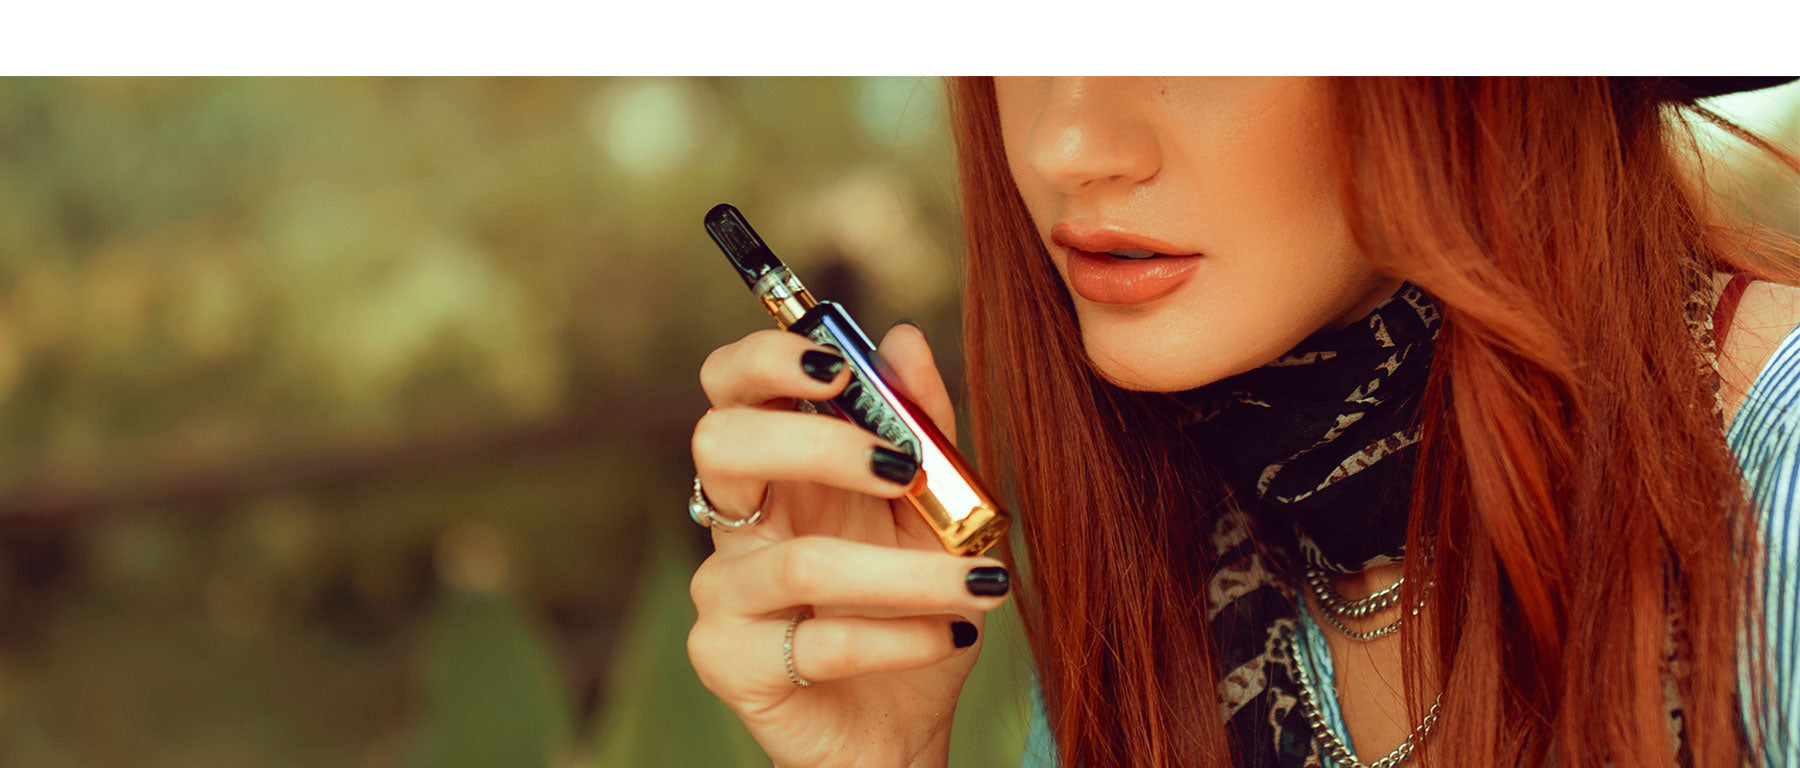 Woman with red hair holding Portable Vaporizer Sutra Stik outside near park